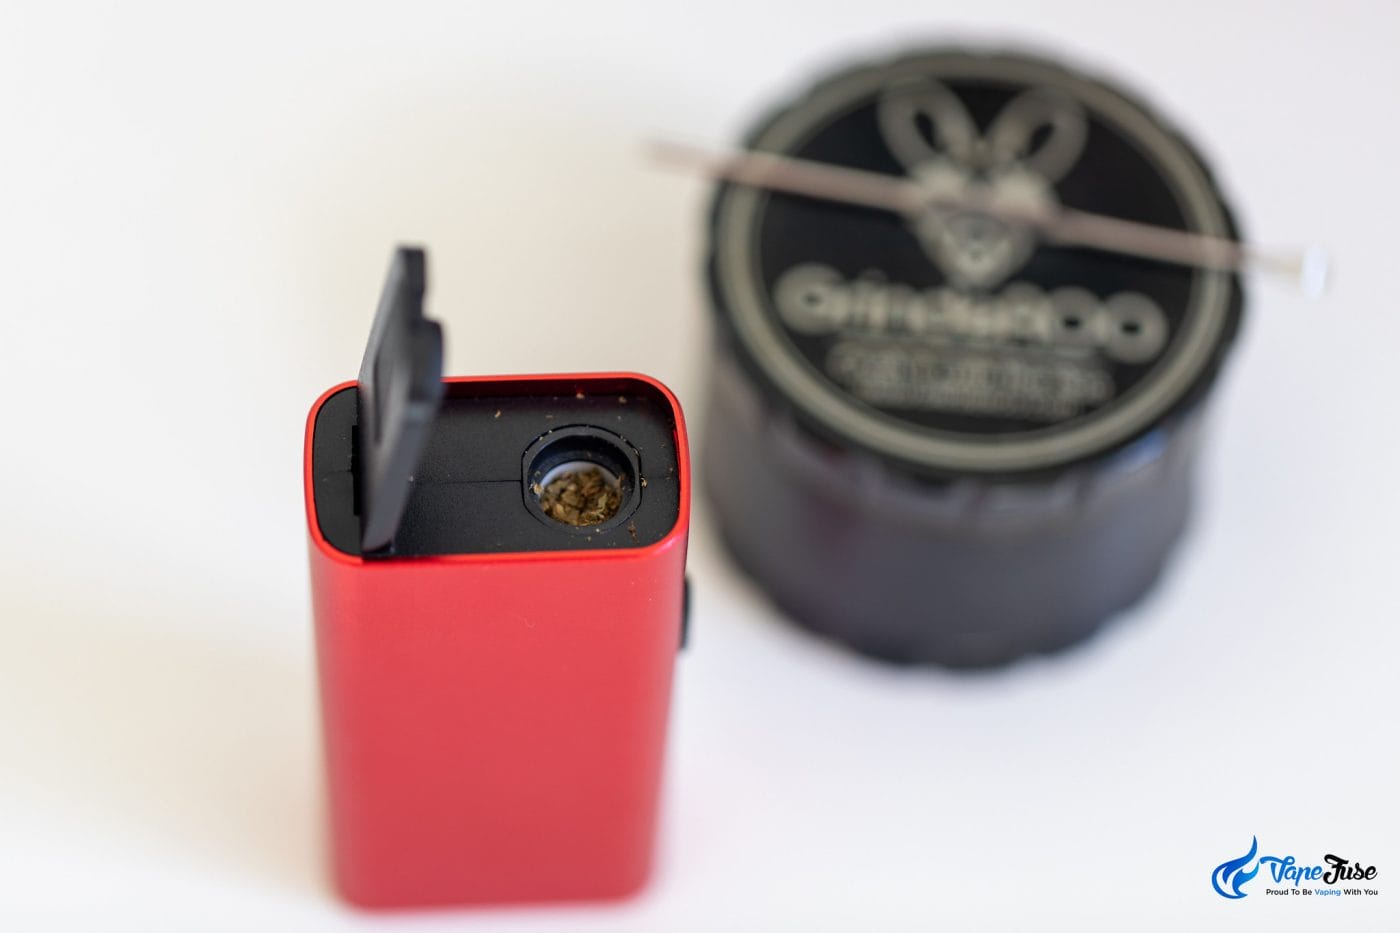 Vaporizer Chamber packed with ground herbs